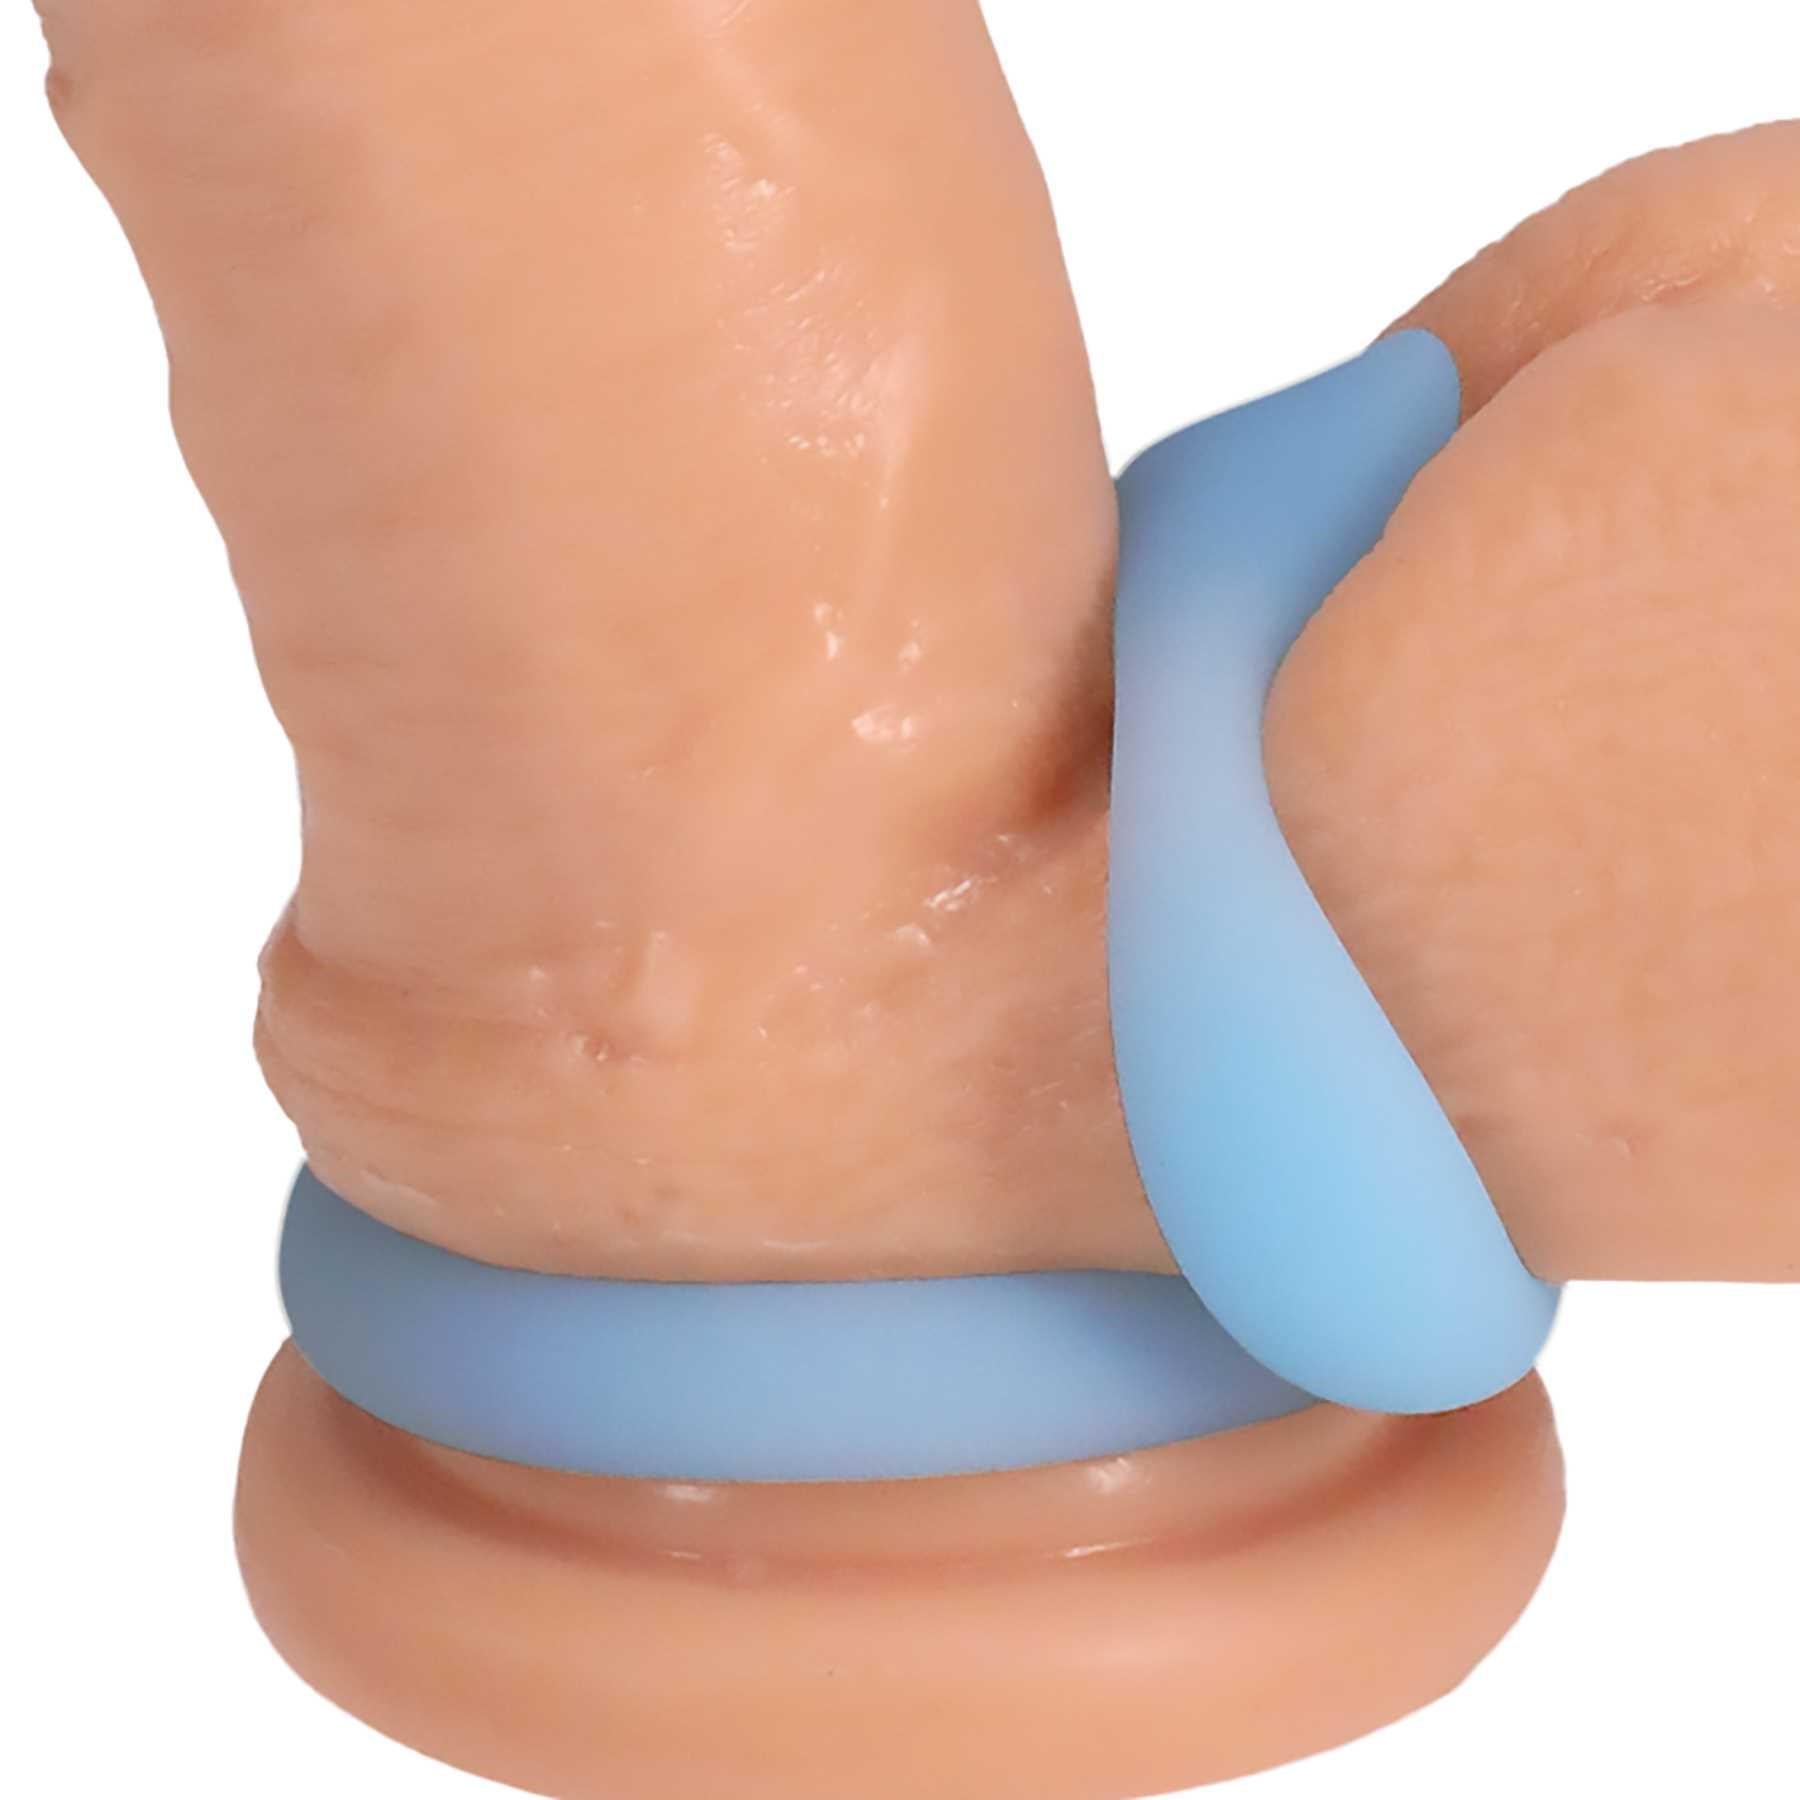 Rock Solid Glow-In-Dark Dual Enhancer Ring on dildo with one ring around base of balls